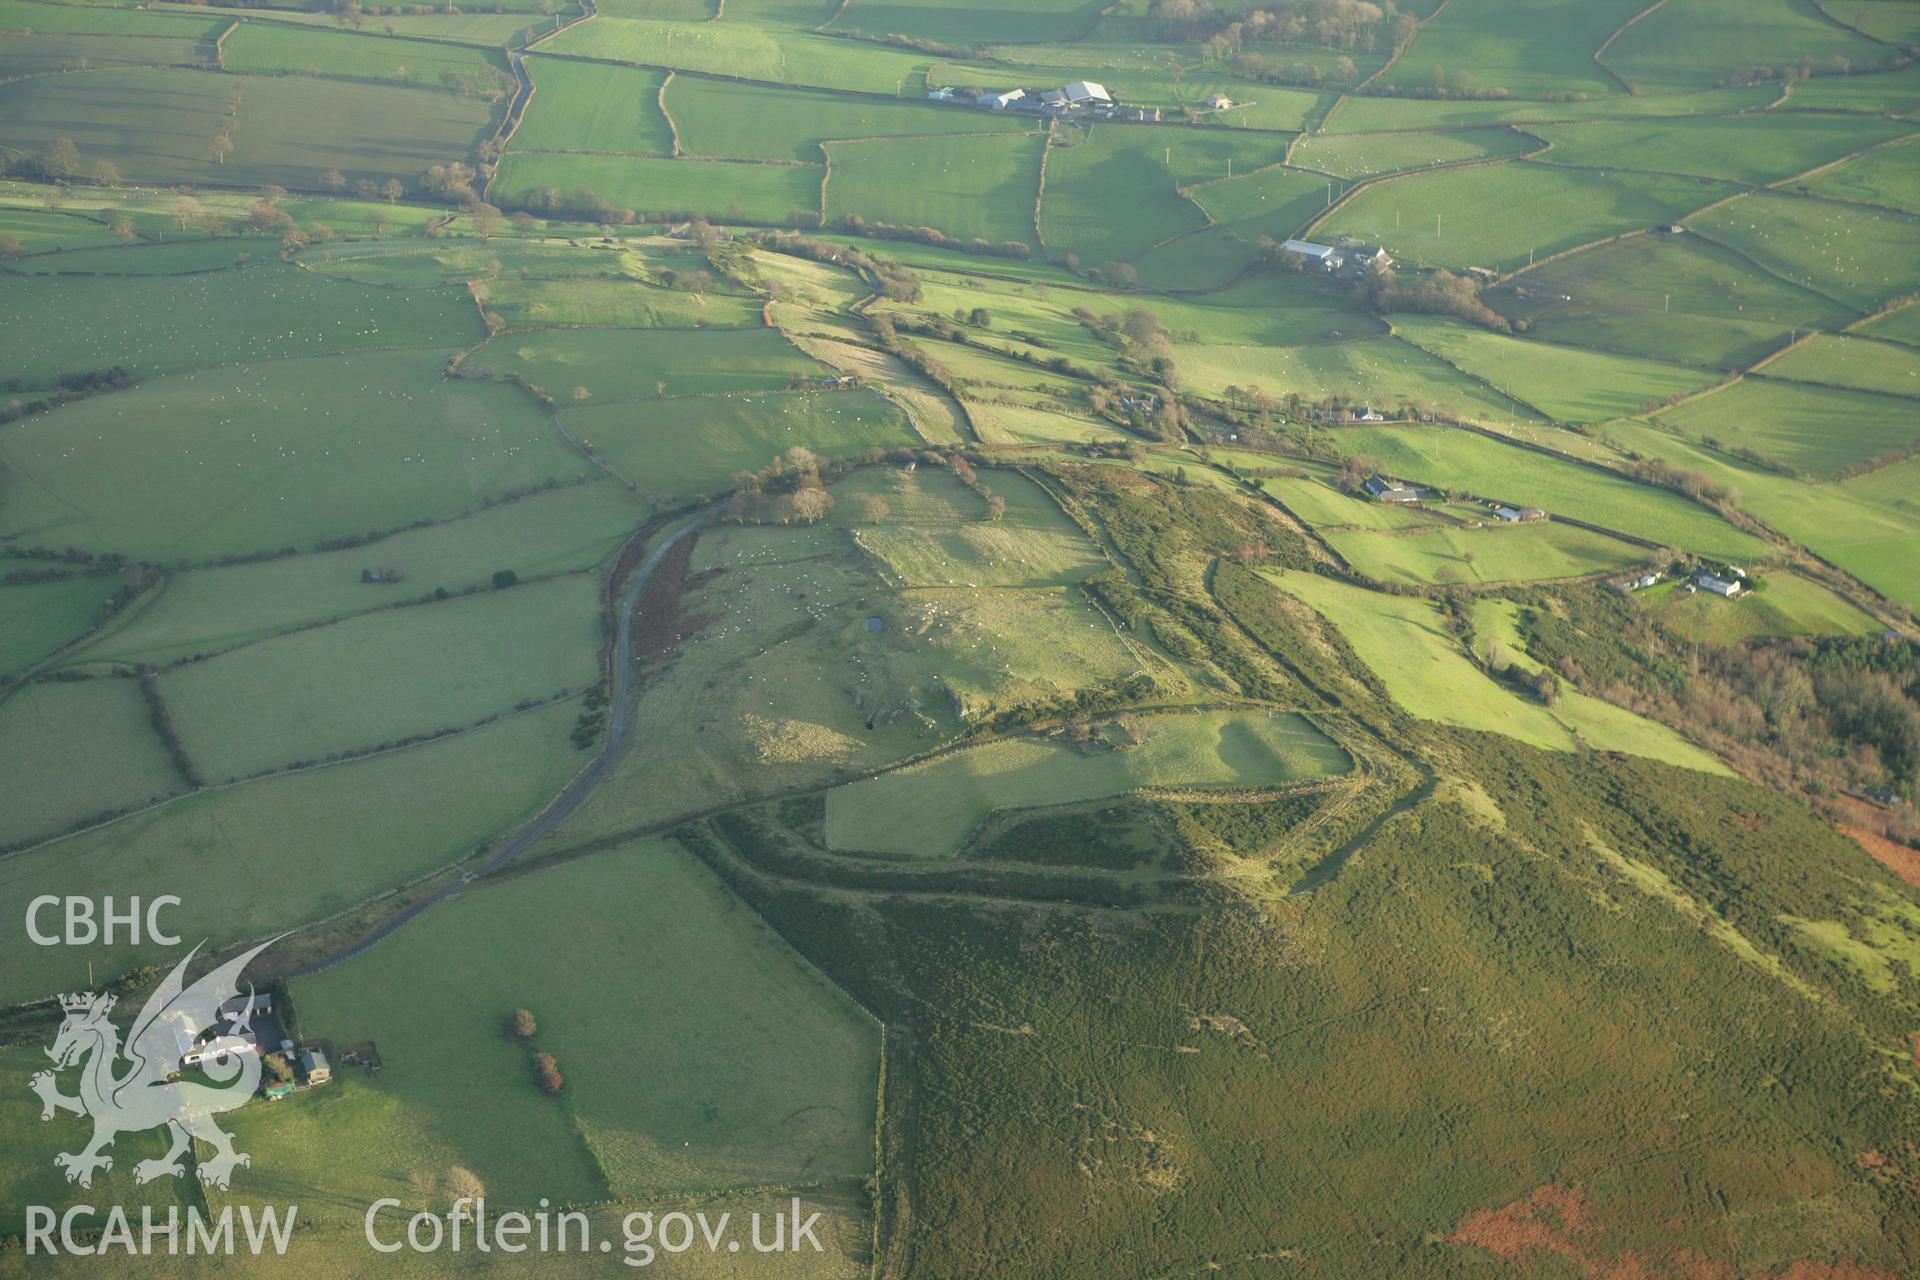 RCAHMW colour oblique aerial photograph of Mynydd y Gaer Hillfort. Taken on 10 December 2009 by Toby Driver